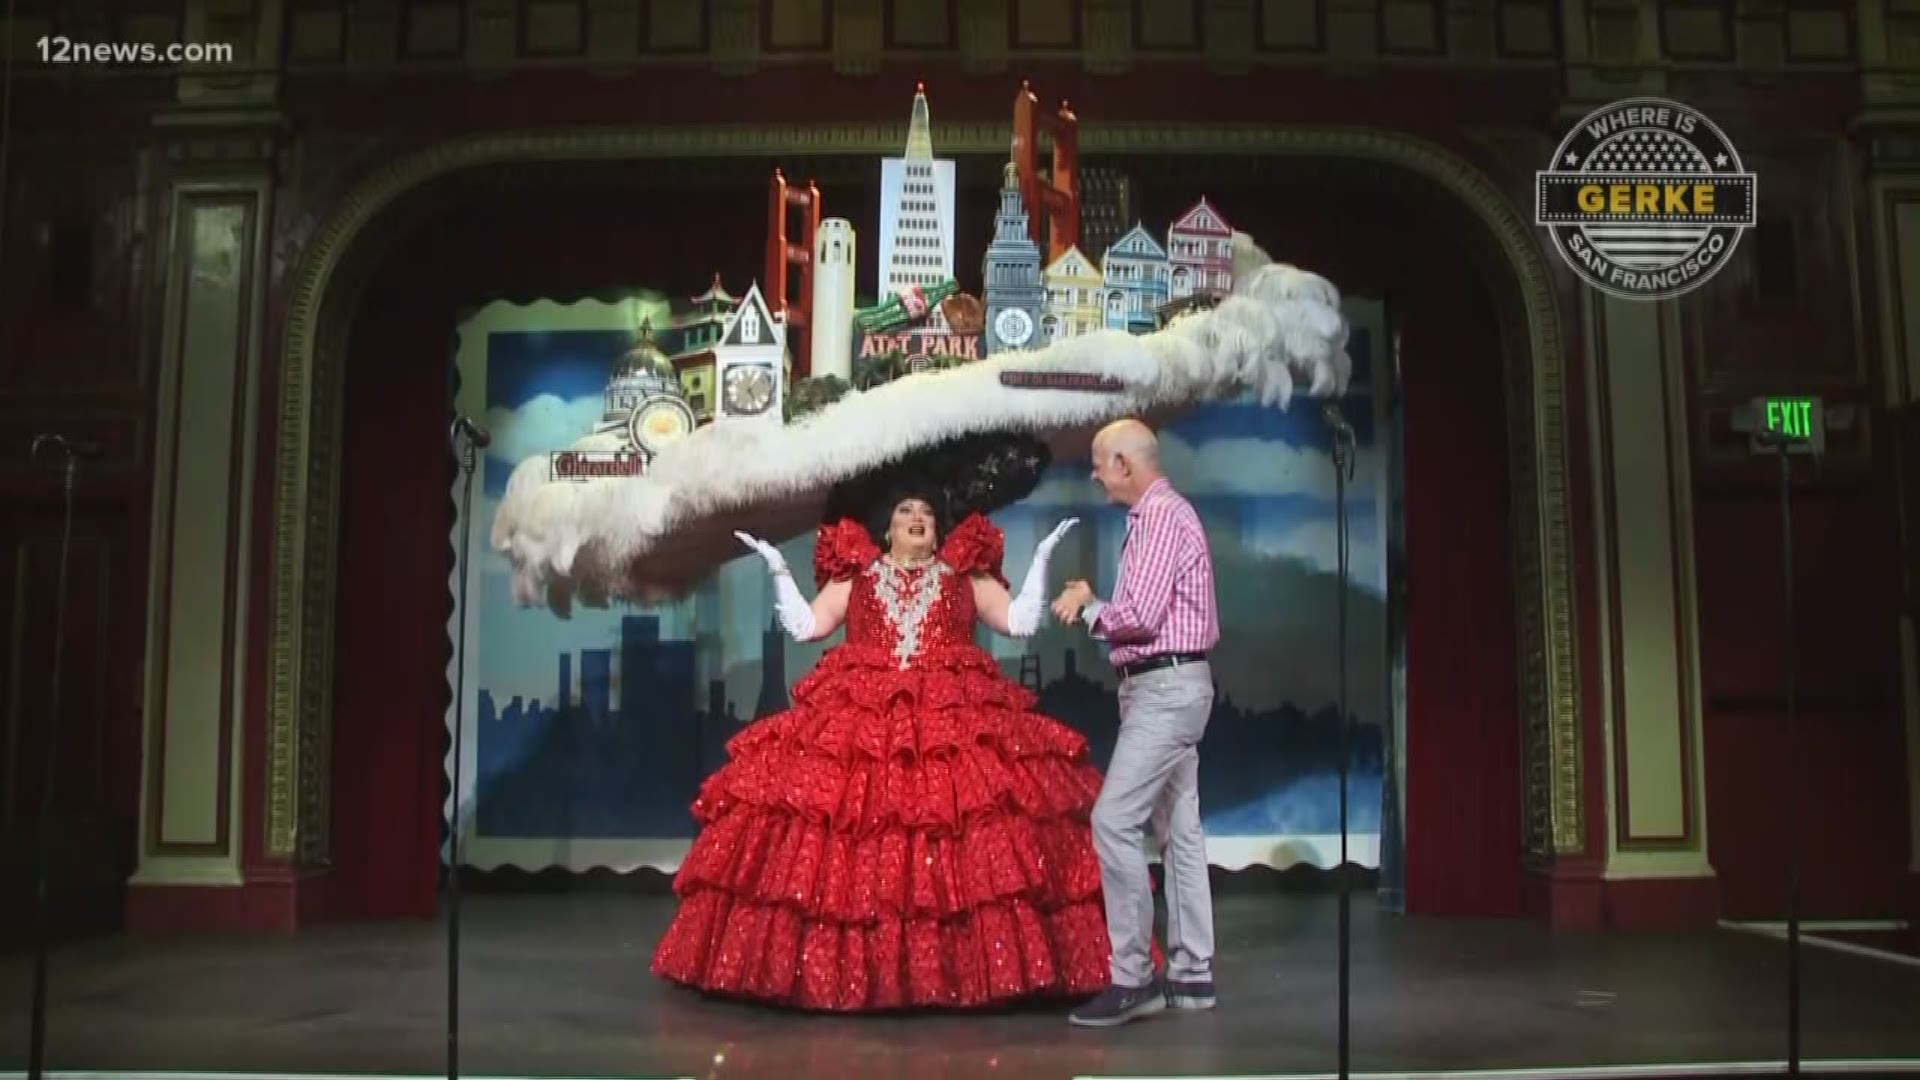 We visit with the stars of Beach Blanket Babylon in San Francisco.